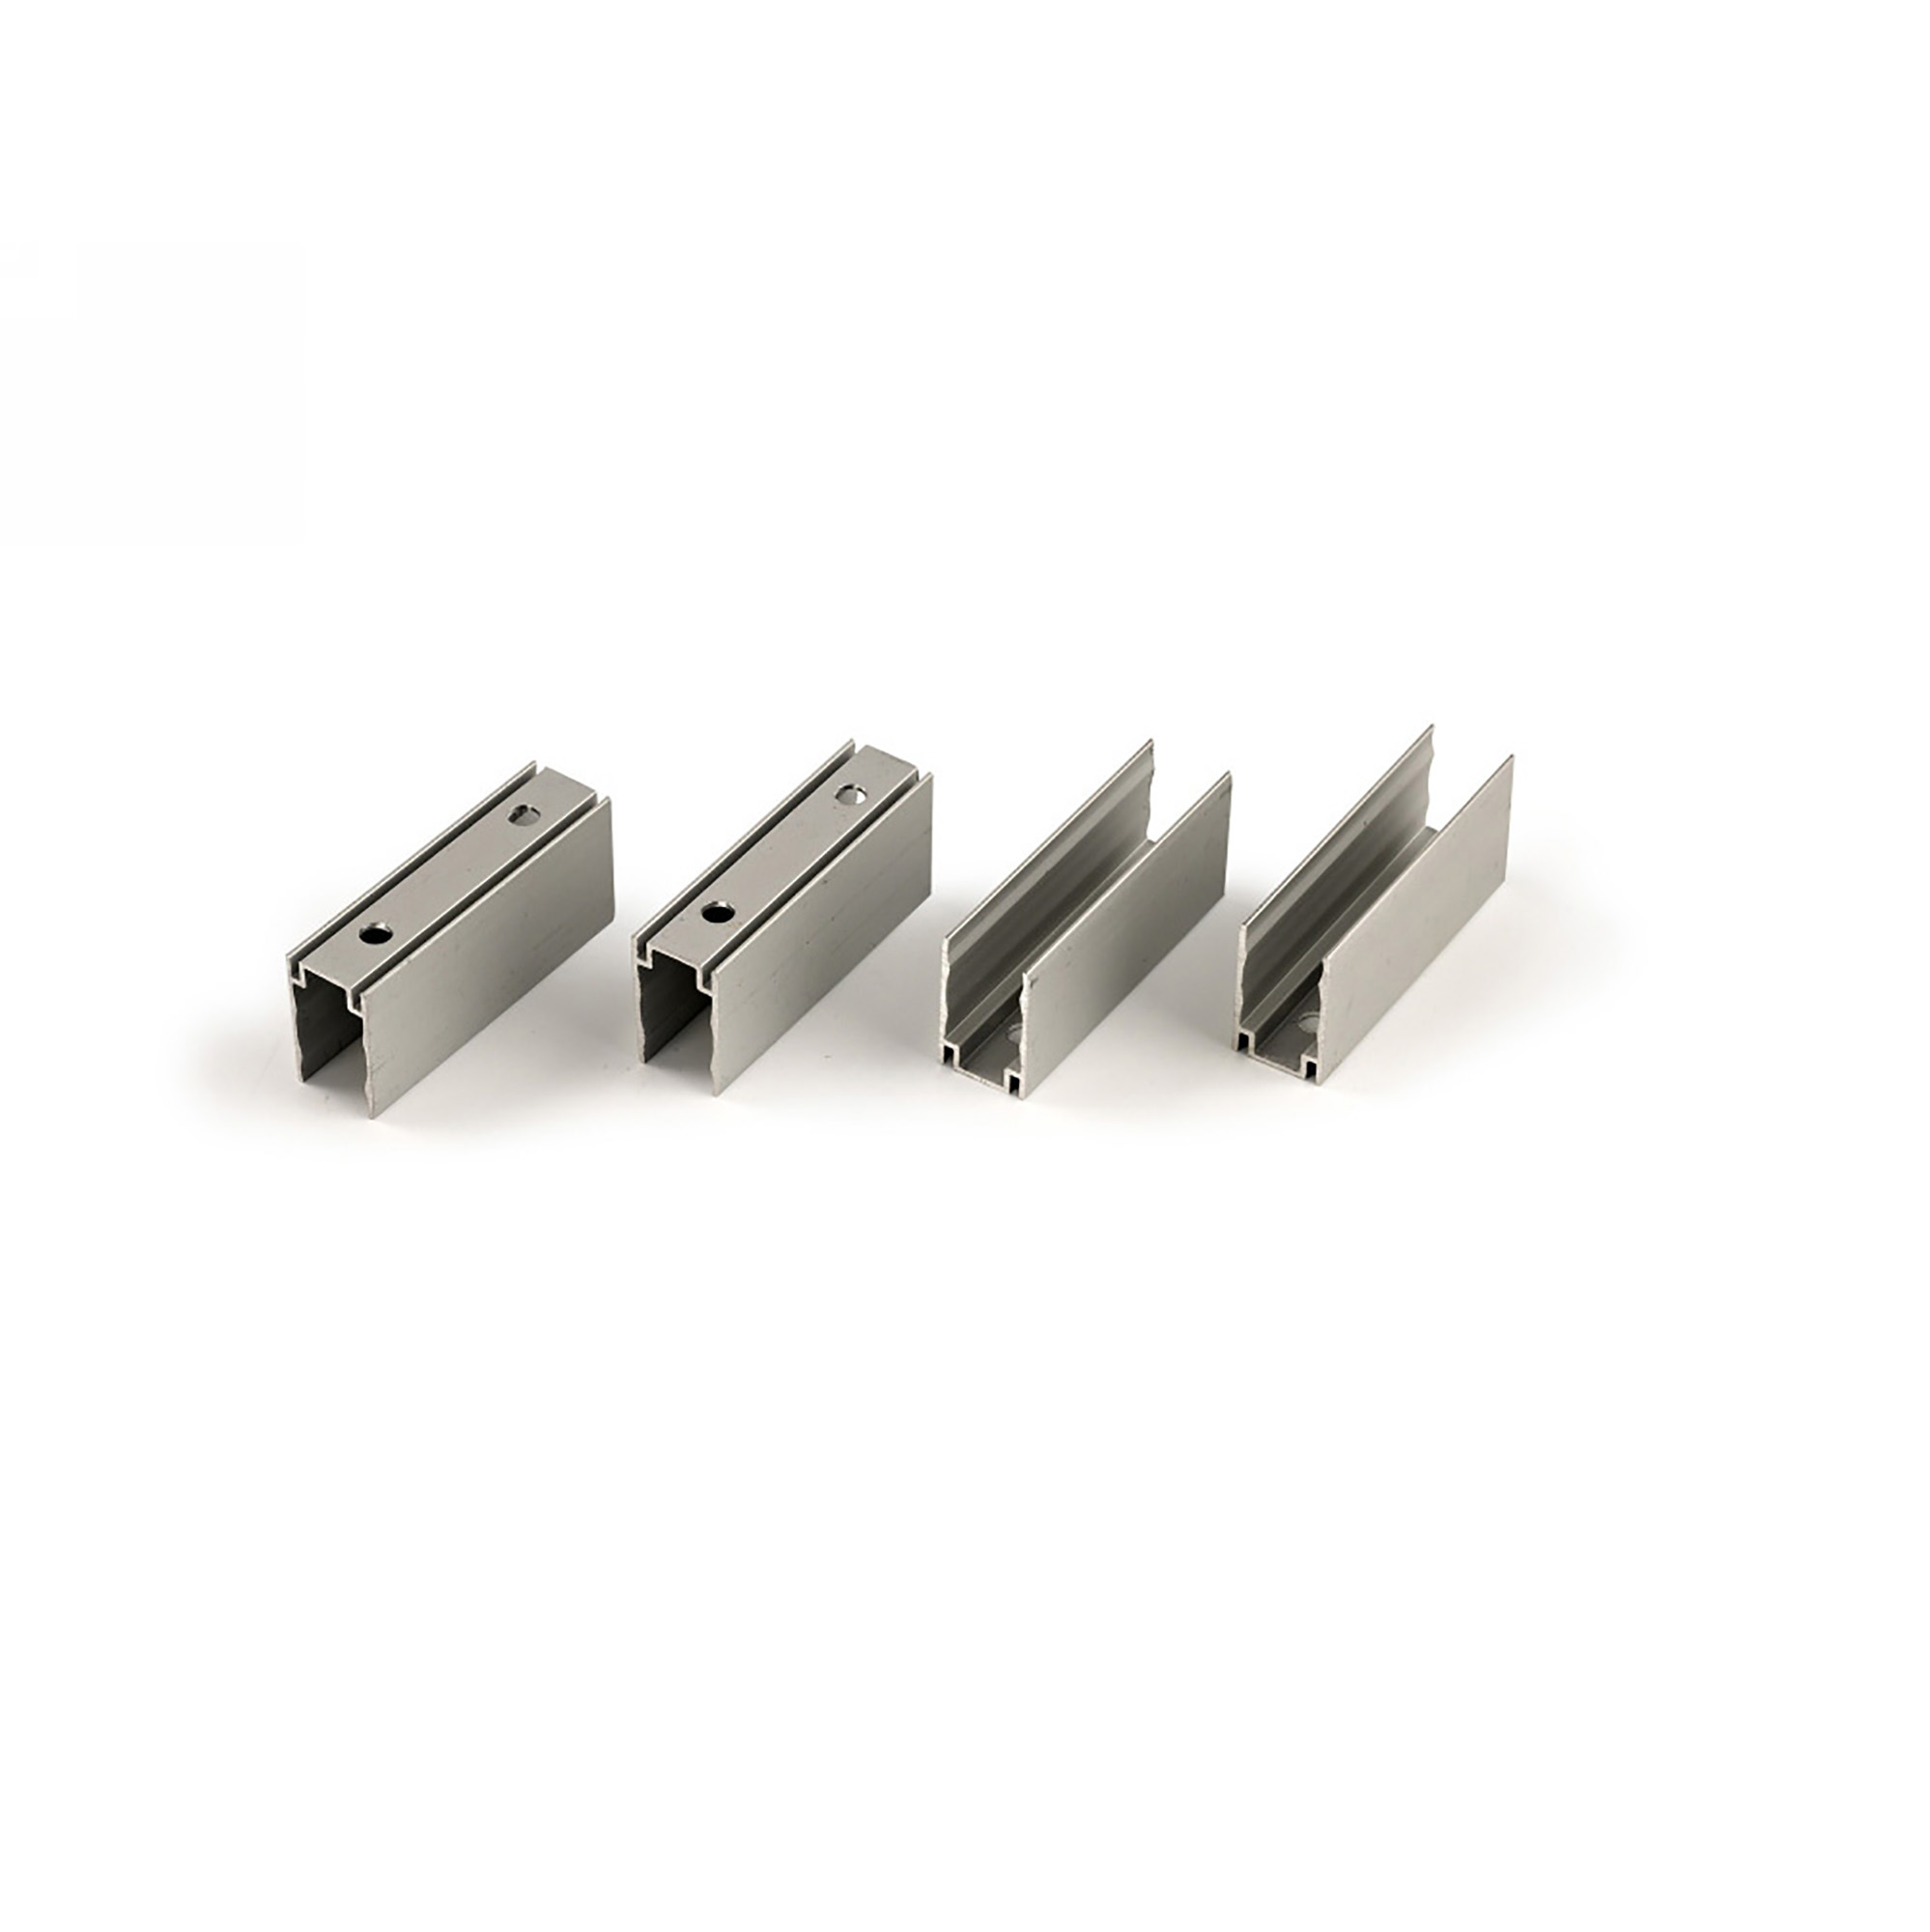 DX770047  Nexi 60 & Pixel SF/SR, Pack of 4 x 5cm 2 Hole Mounting Clip